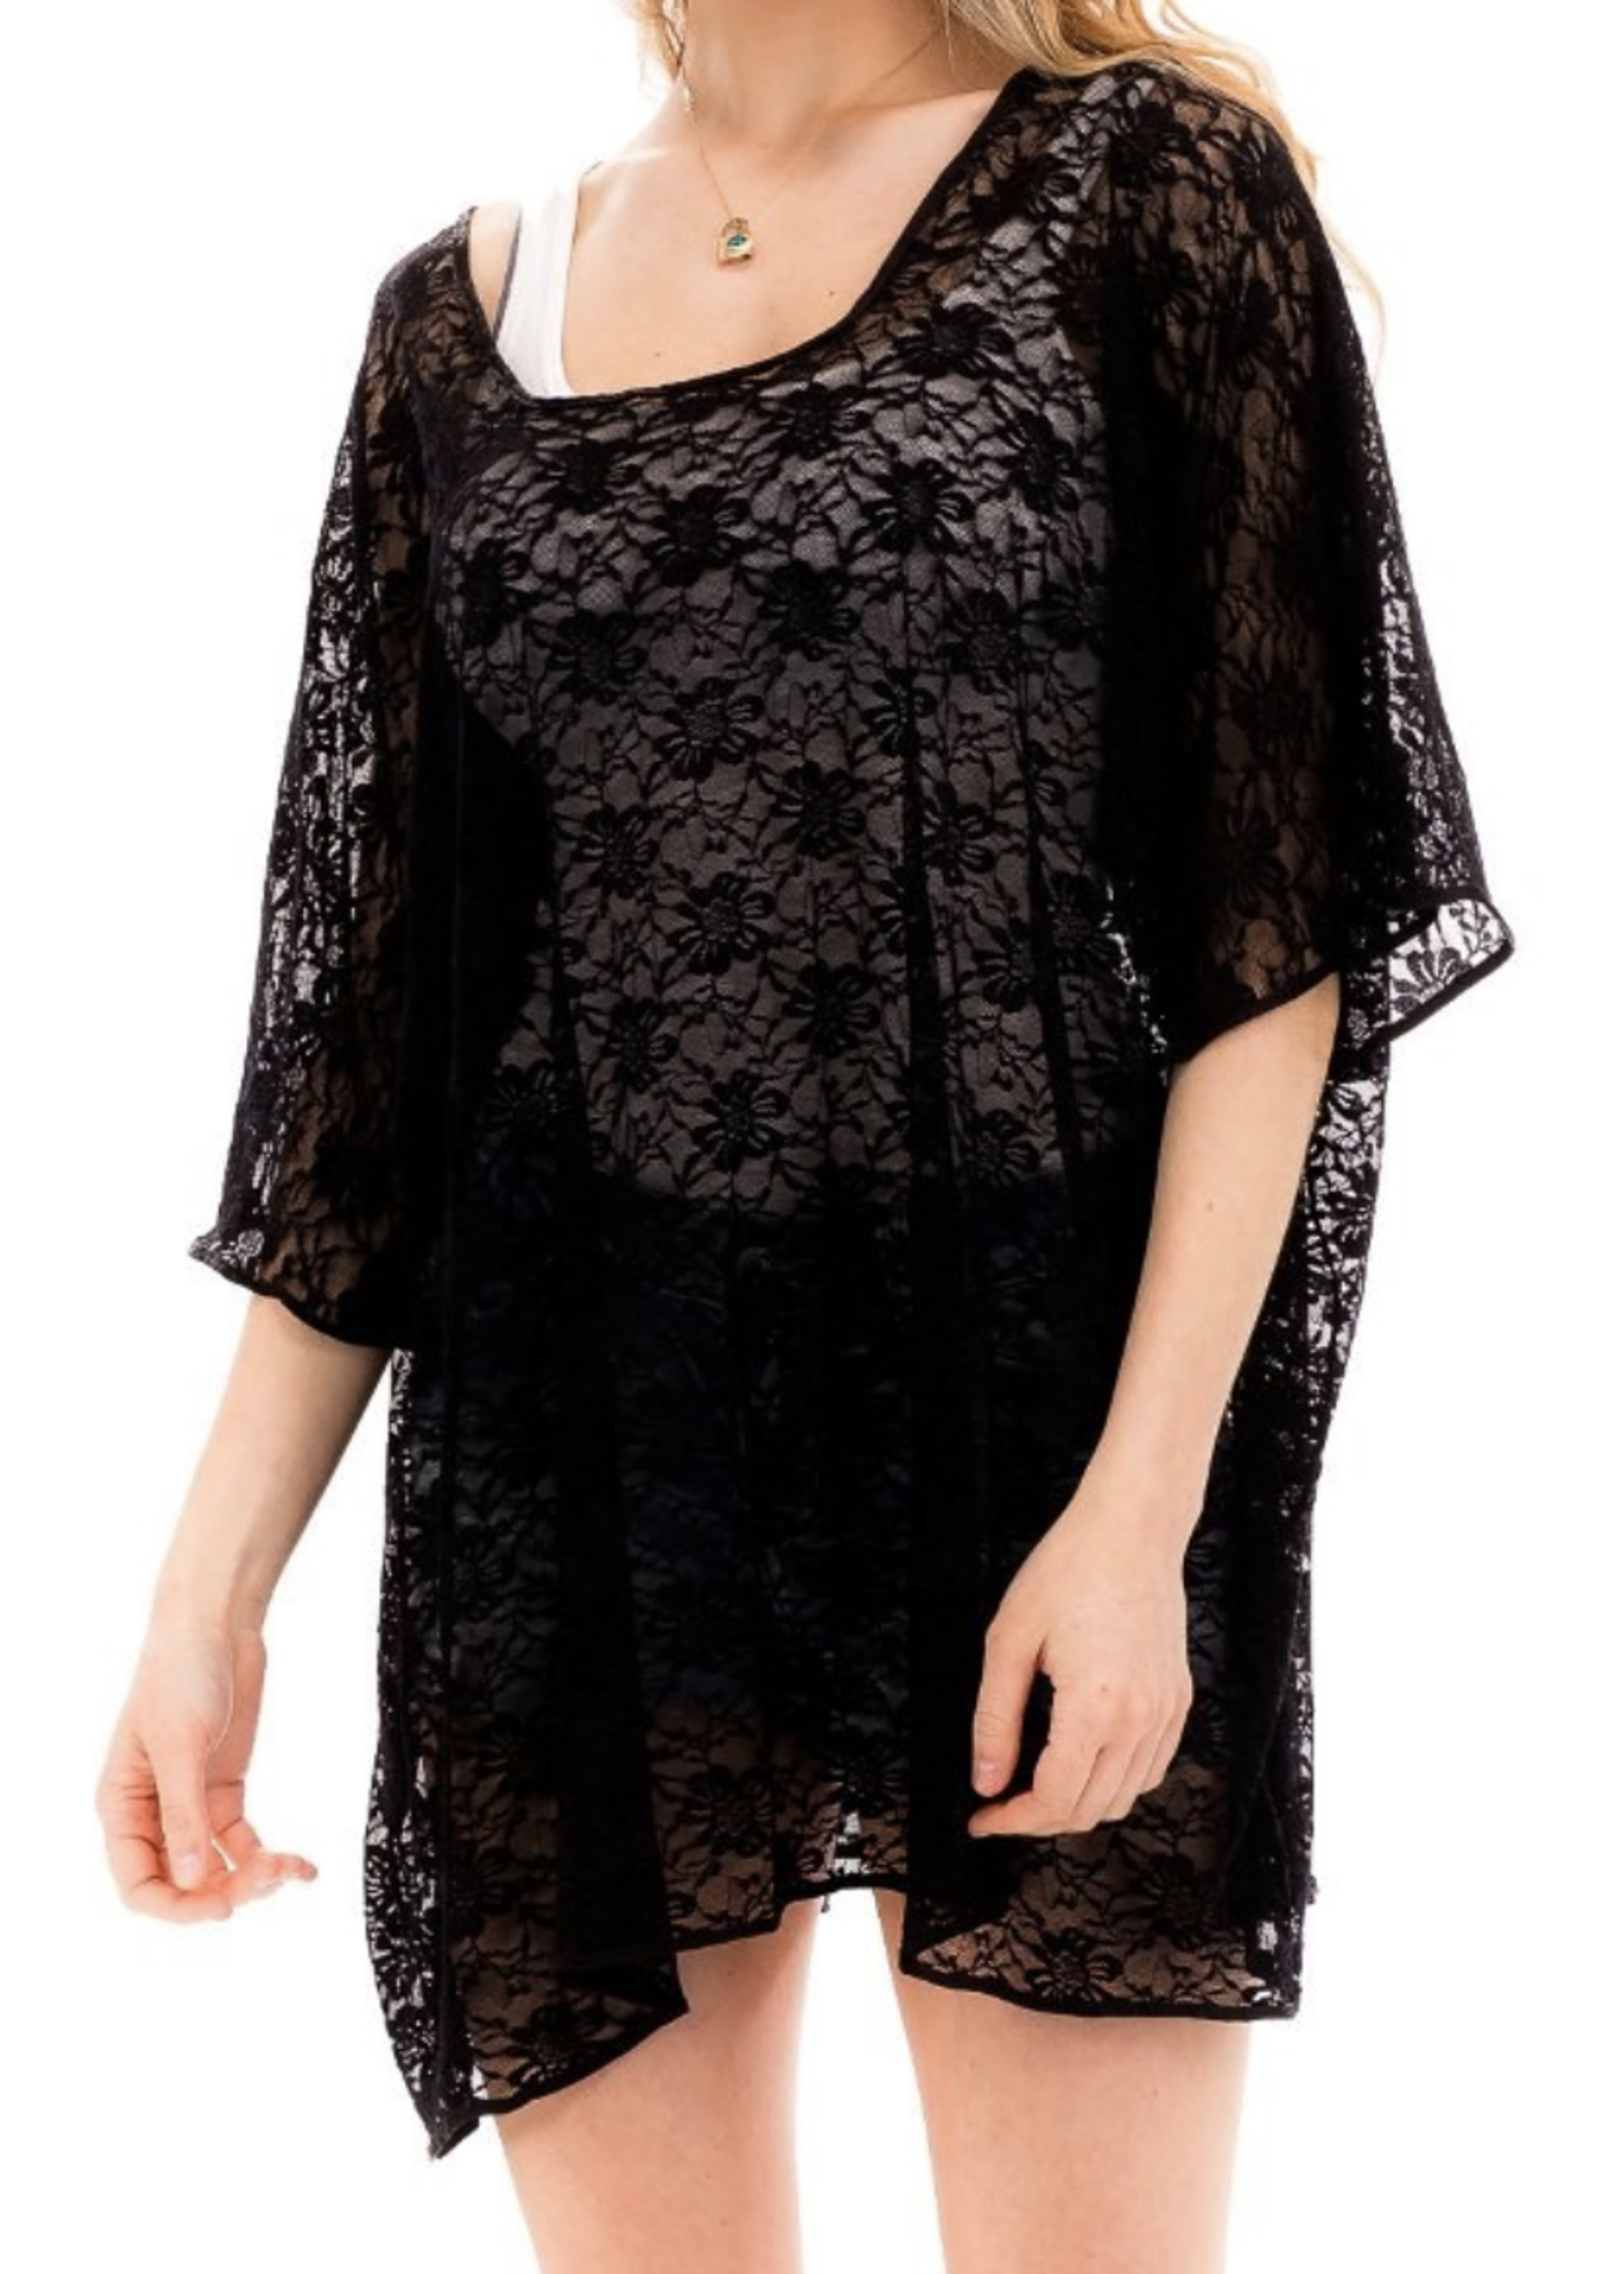 Daisy mesh lace cover up